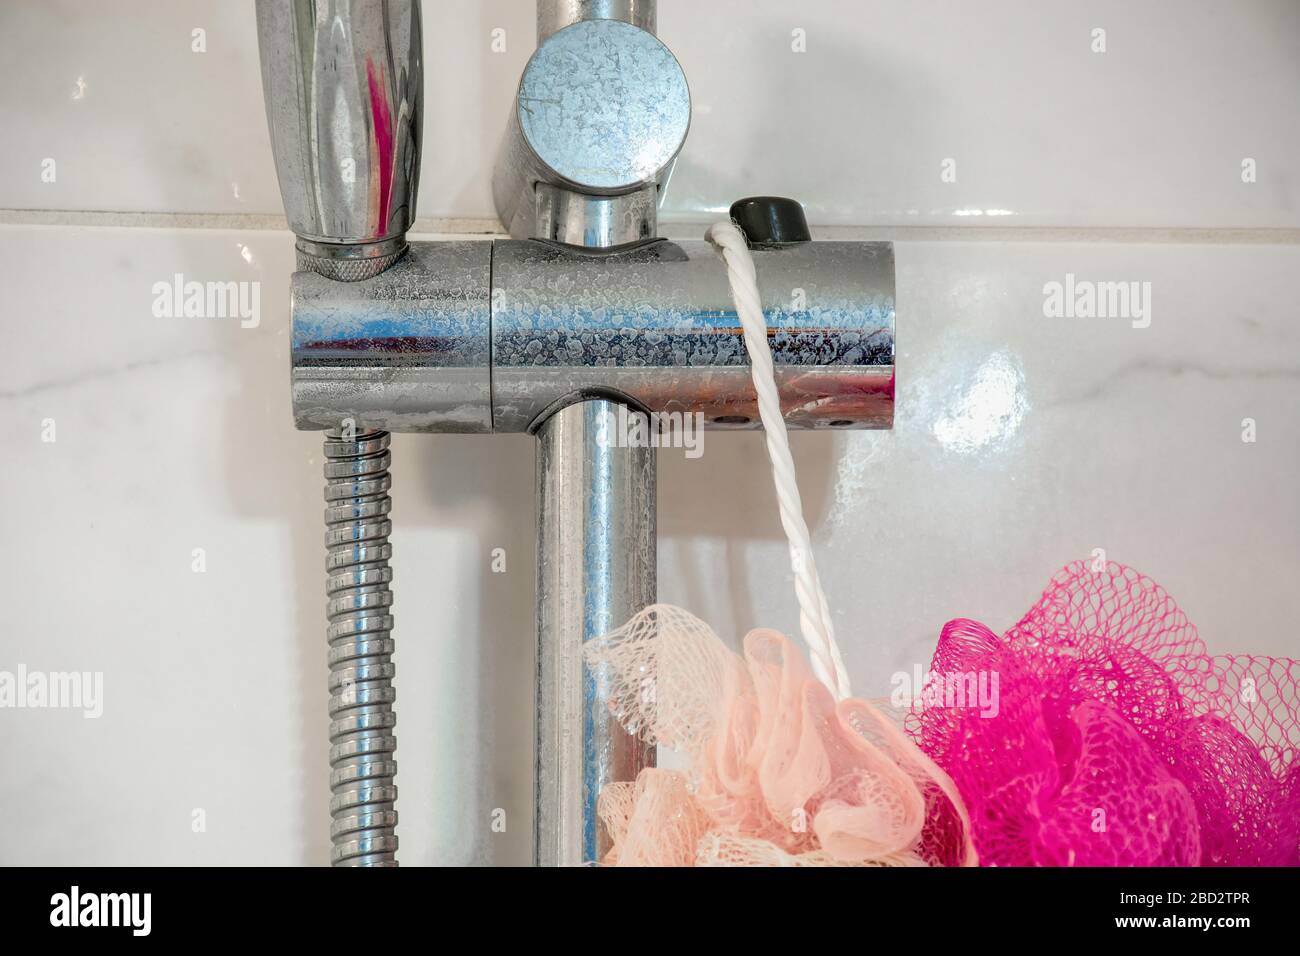 Dirty chrome shower rod with limescale that should be cleaned.  Calcified shower due to hard water. Calcium mineral buildup. Stock Photo